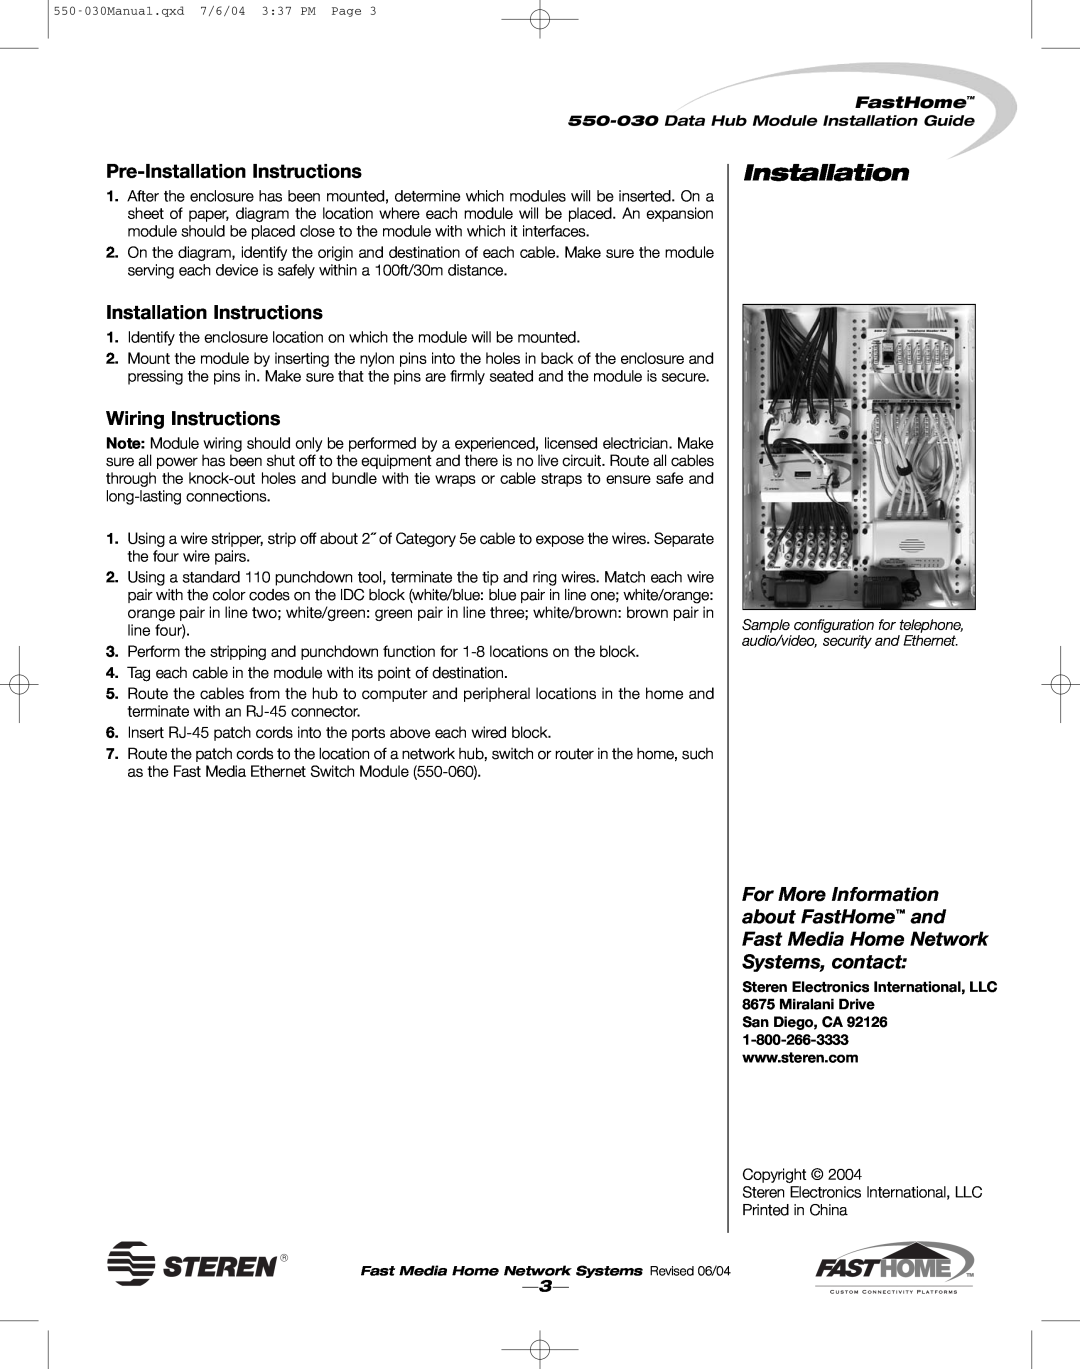 Steren 550-030 manual Pre-Installation Instructions, Wiring Instructions, FastHome 